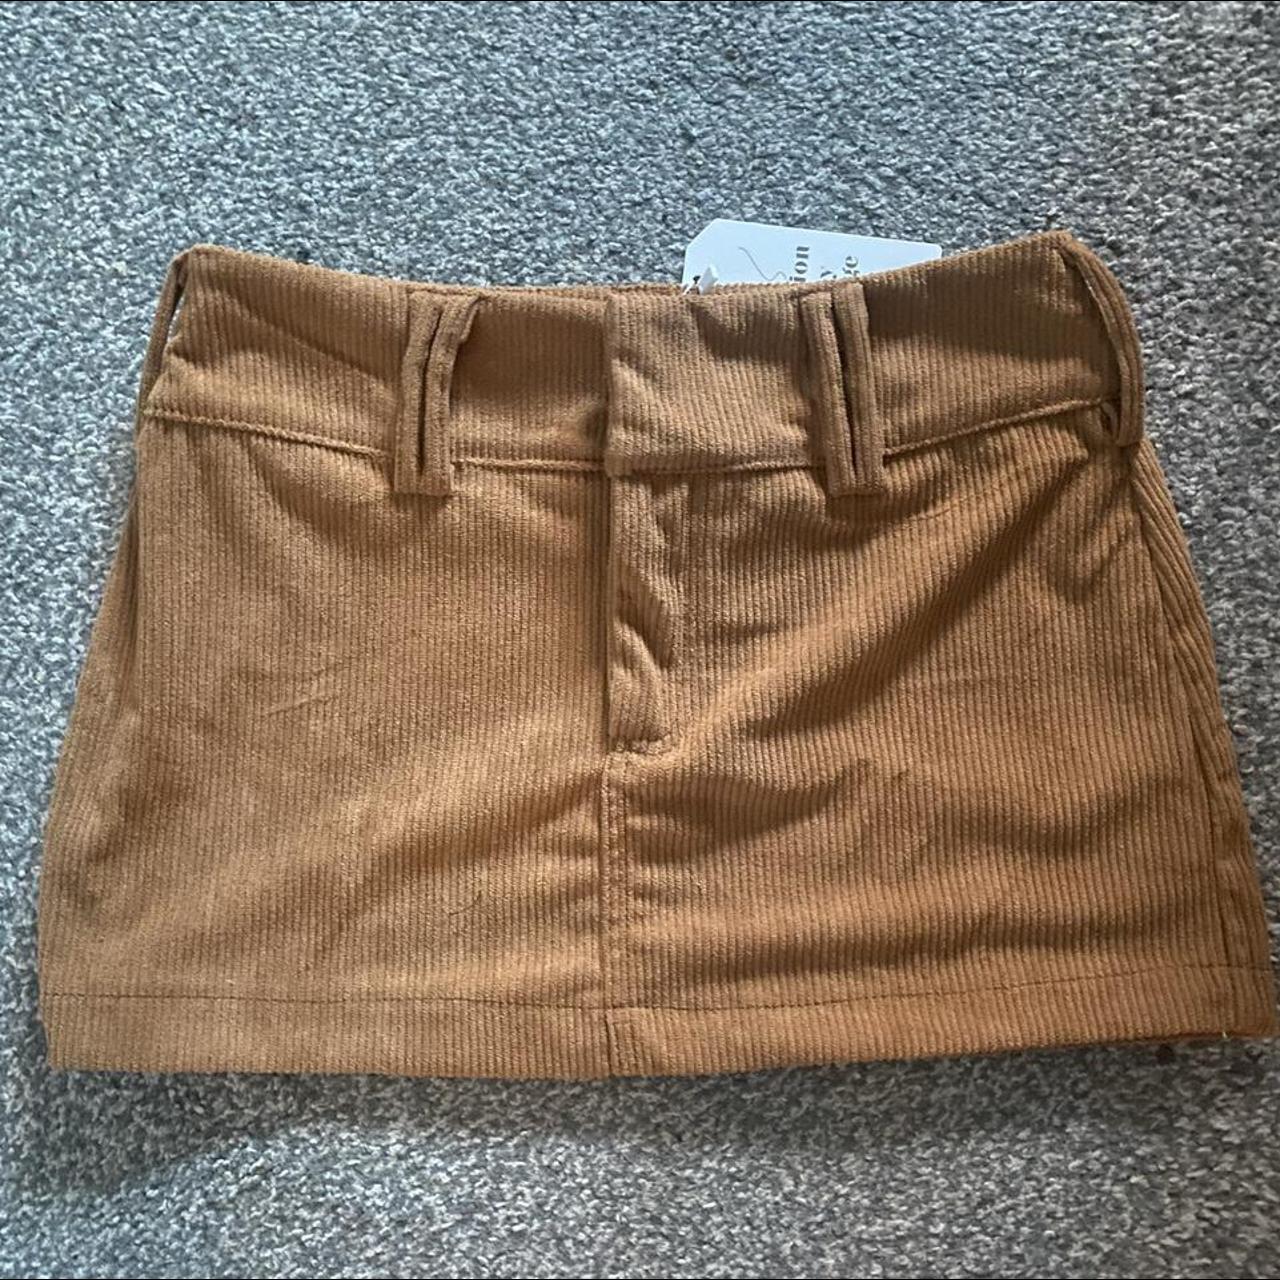 Product Image 1 - Brown corduroy mini skirt, labelled